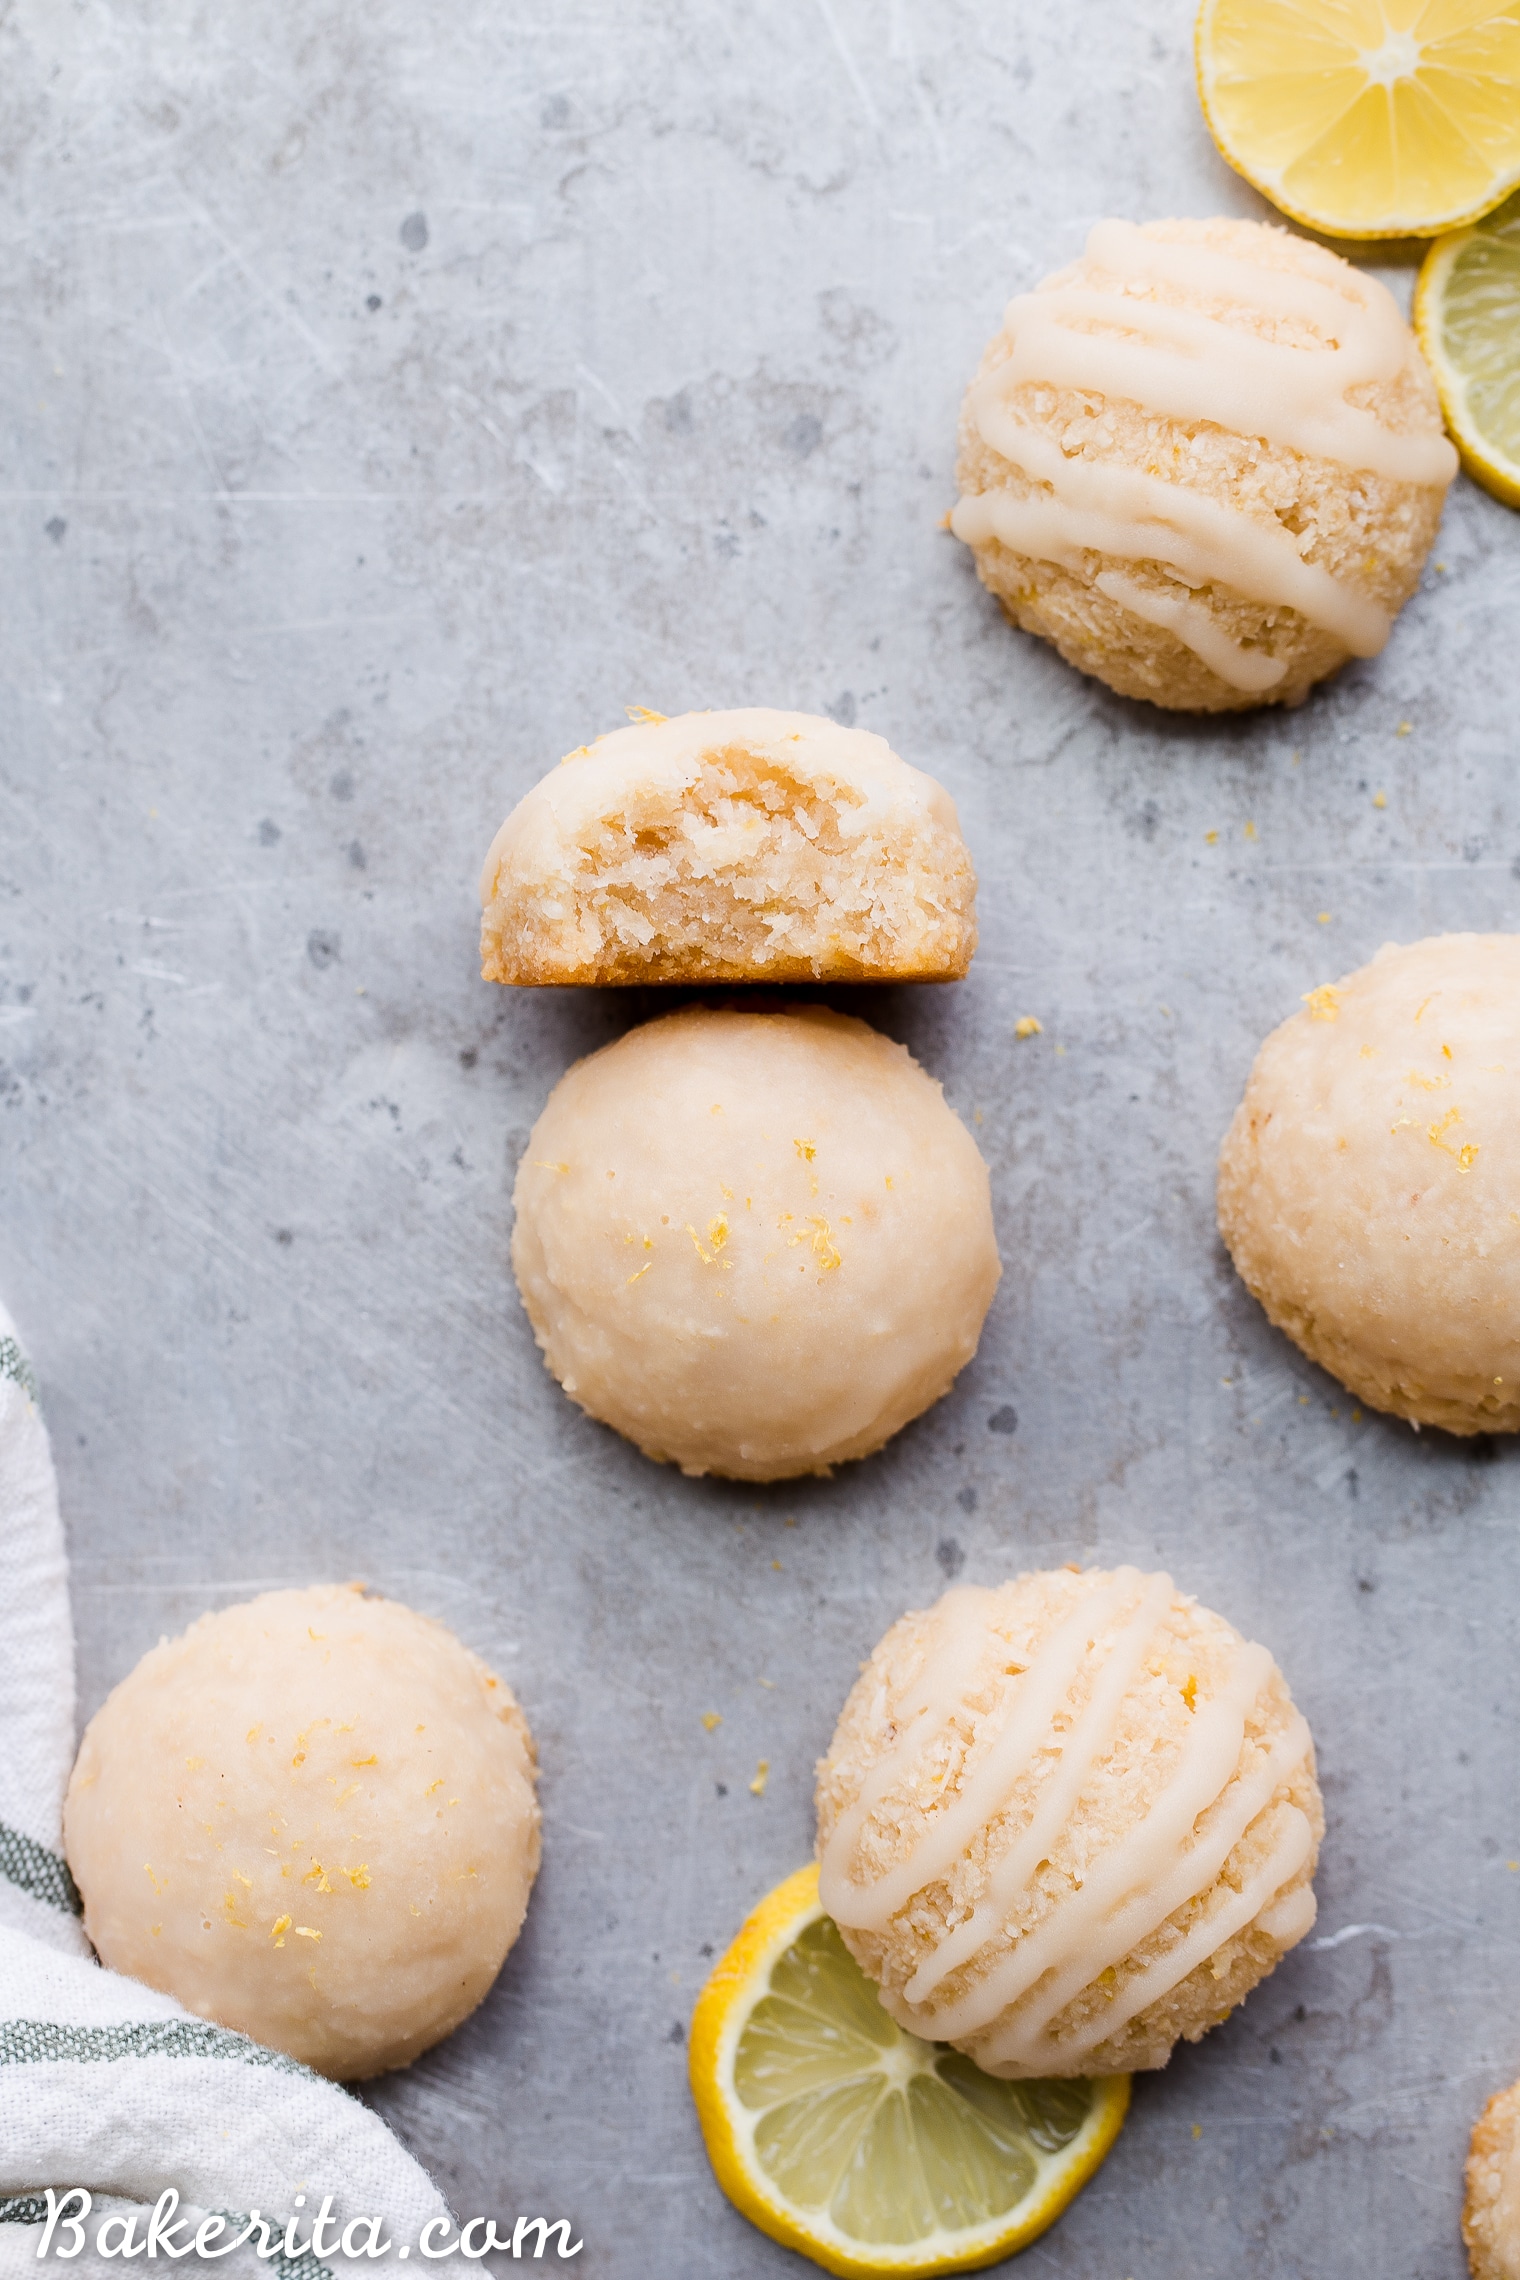 These Lemon Macaroons are bright with lemon flavor, with a touch of maple sweetness and a deliciously chewy texture. The tart lemon glaze is made with coconut butter. You're going to love these irresistibly scrumptious gluten-free, paleo, and vegan macaroons.